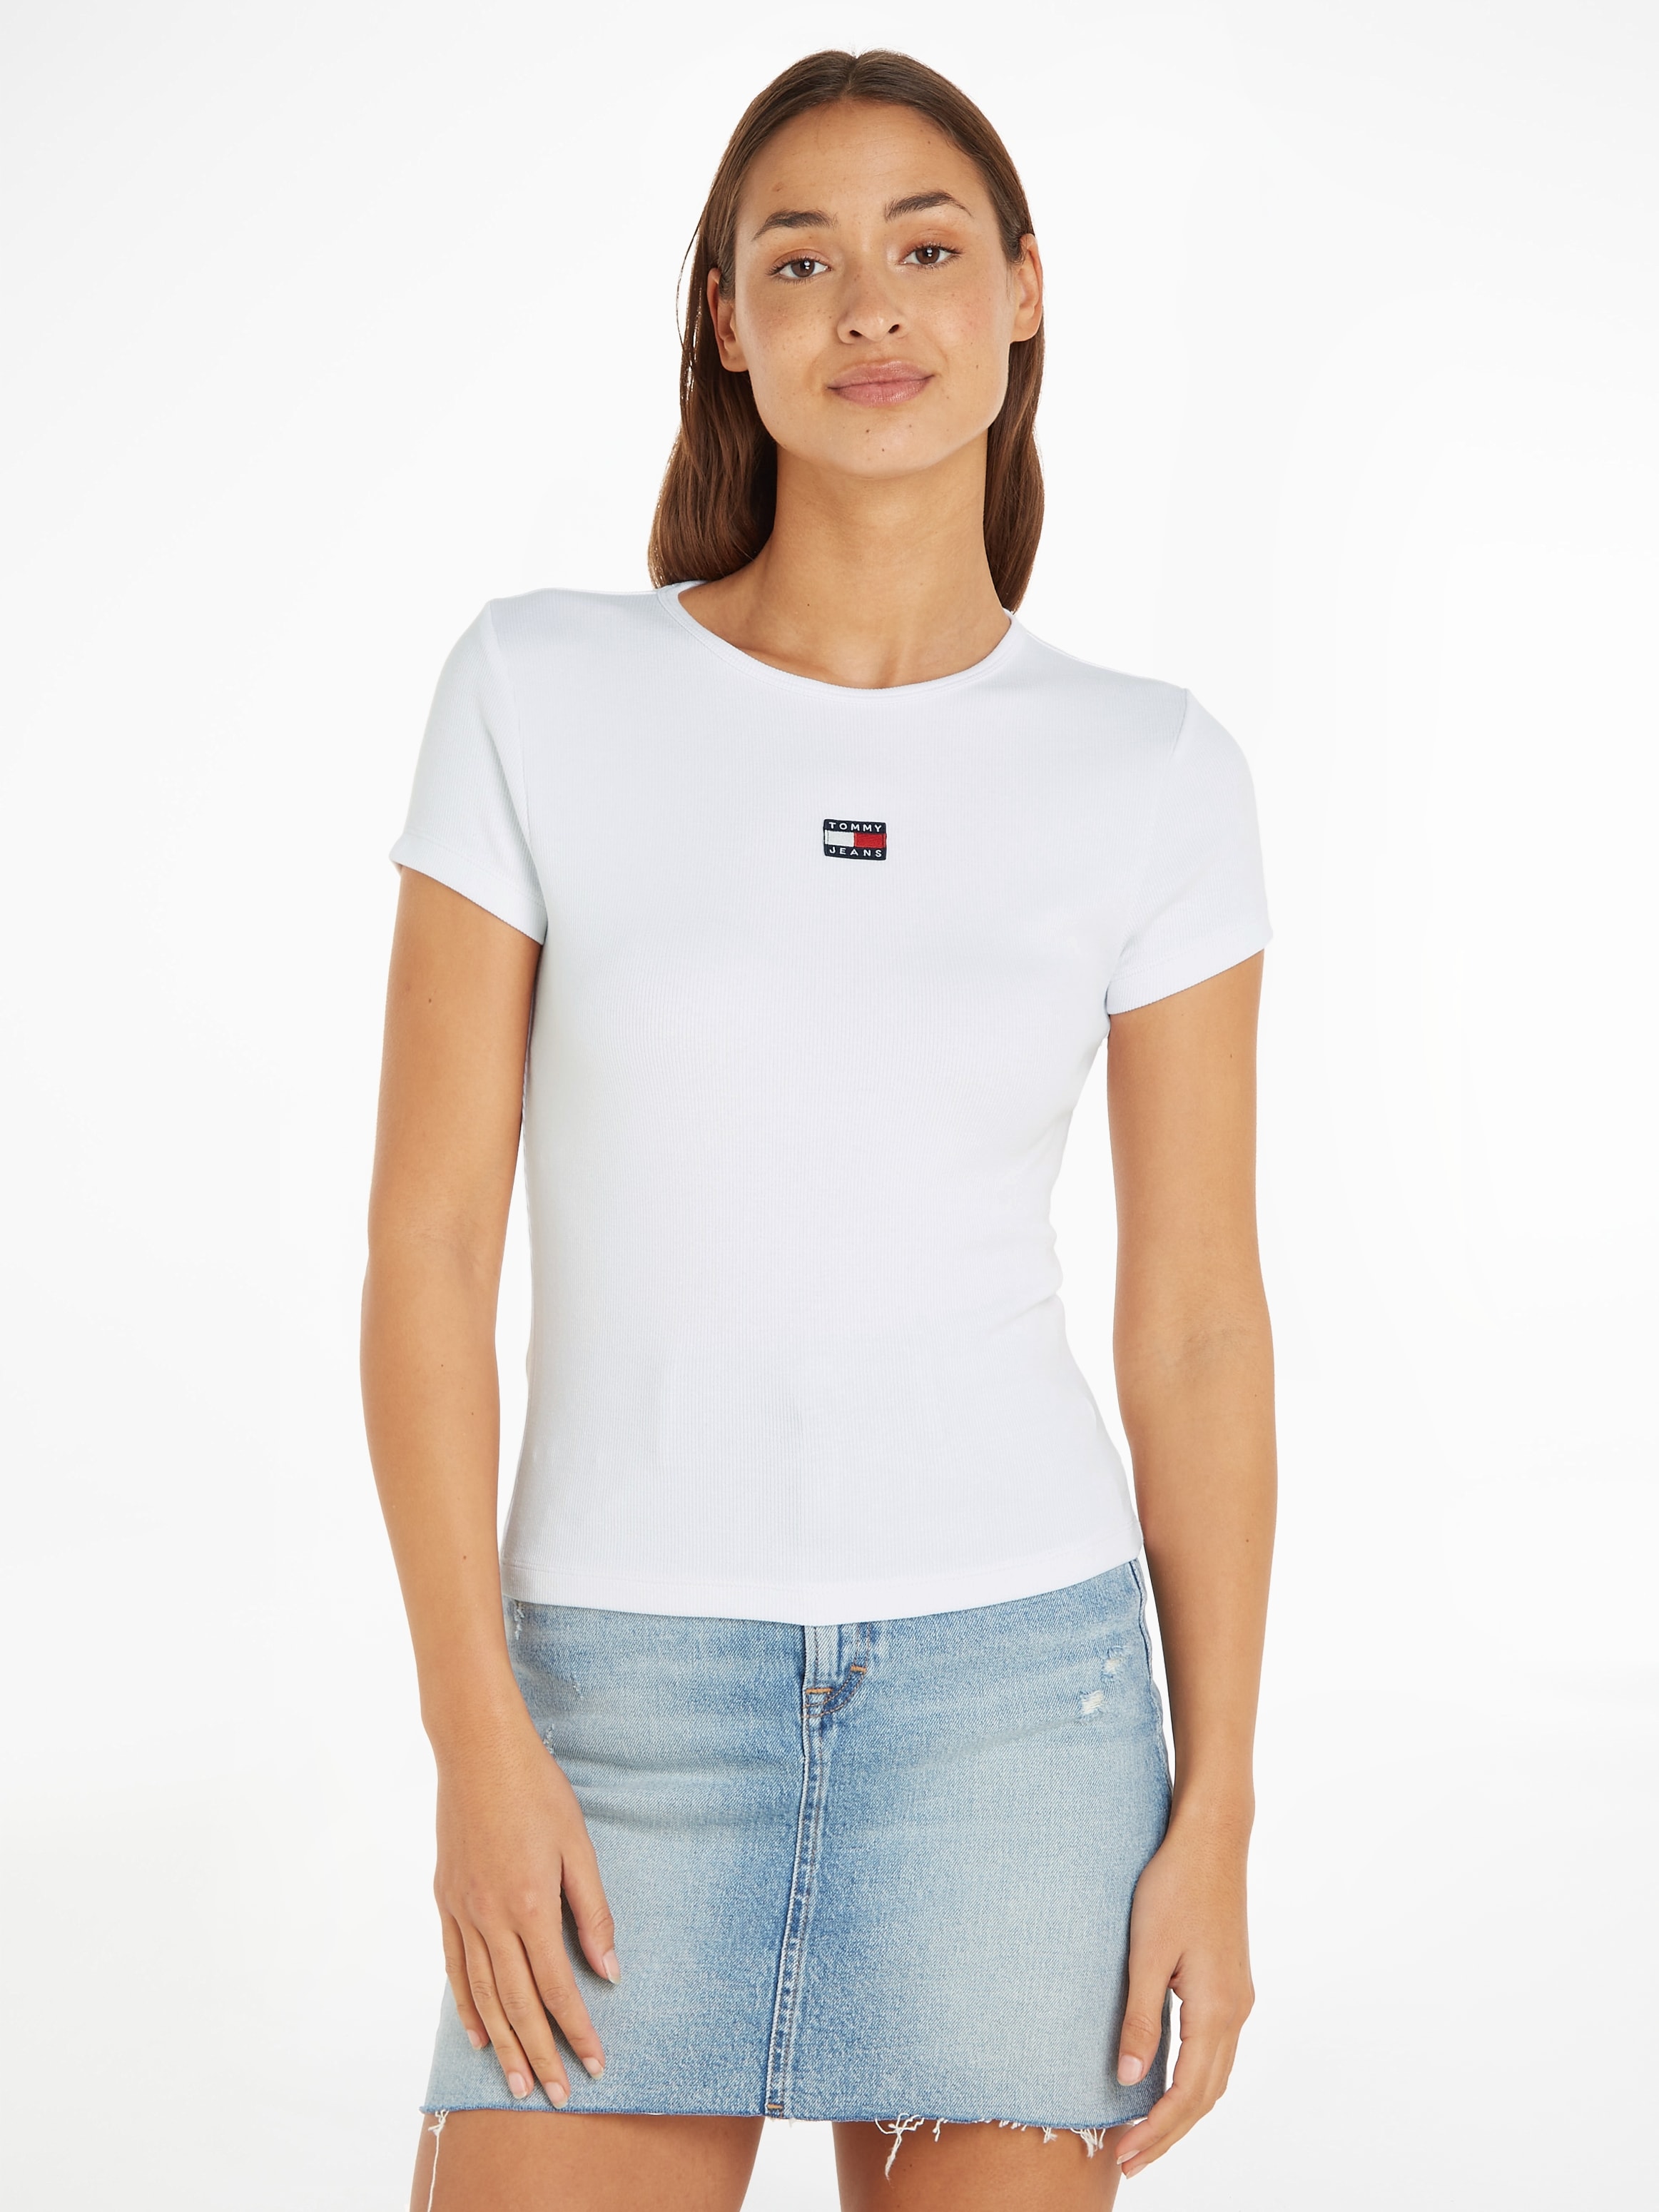 ♕ T-Shirt TEE«, mit XS bei Tommy »TJW Logobadge RIB BBY BADGE Jeans